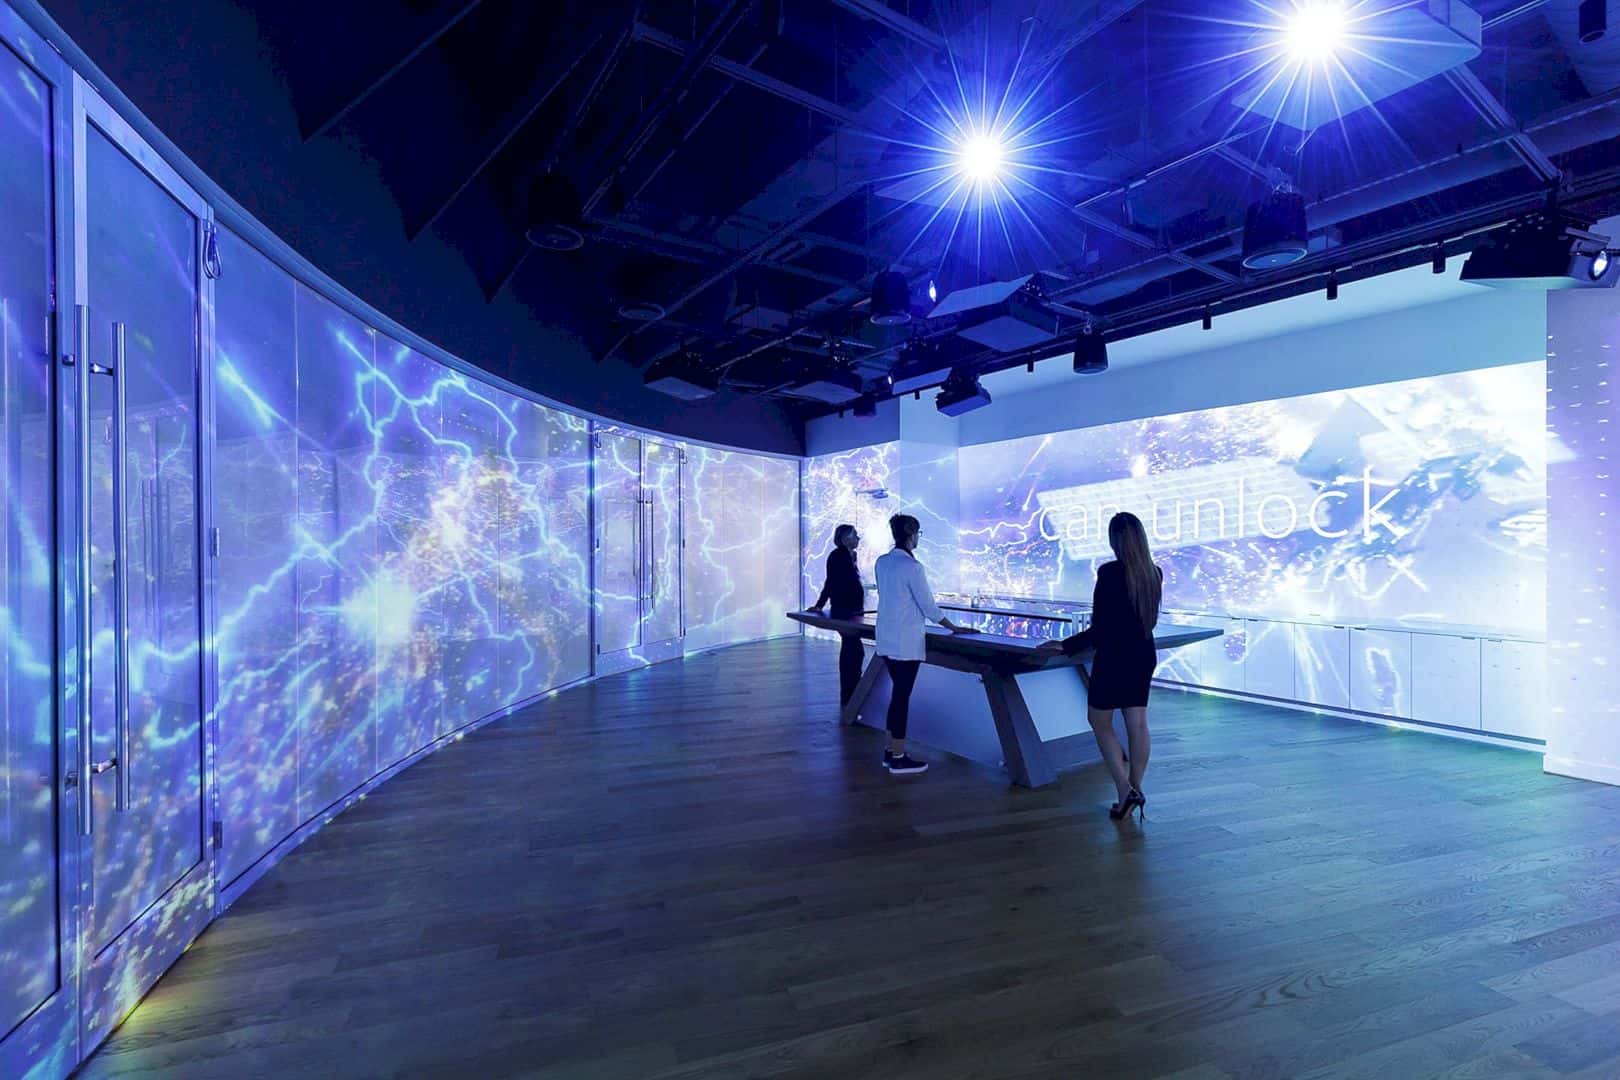 Celestica Customer Experience Center Reflecting The Celestica Story Through A Digital And Experiential Space 5